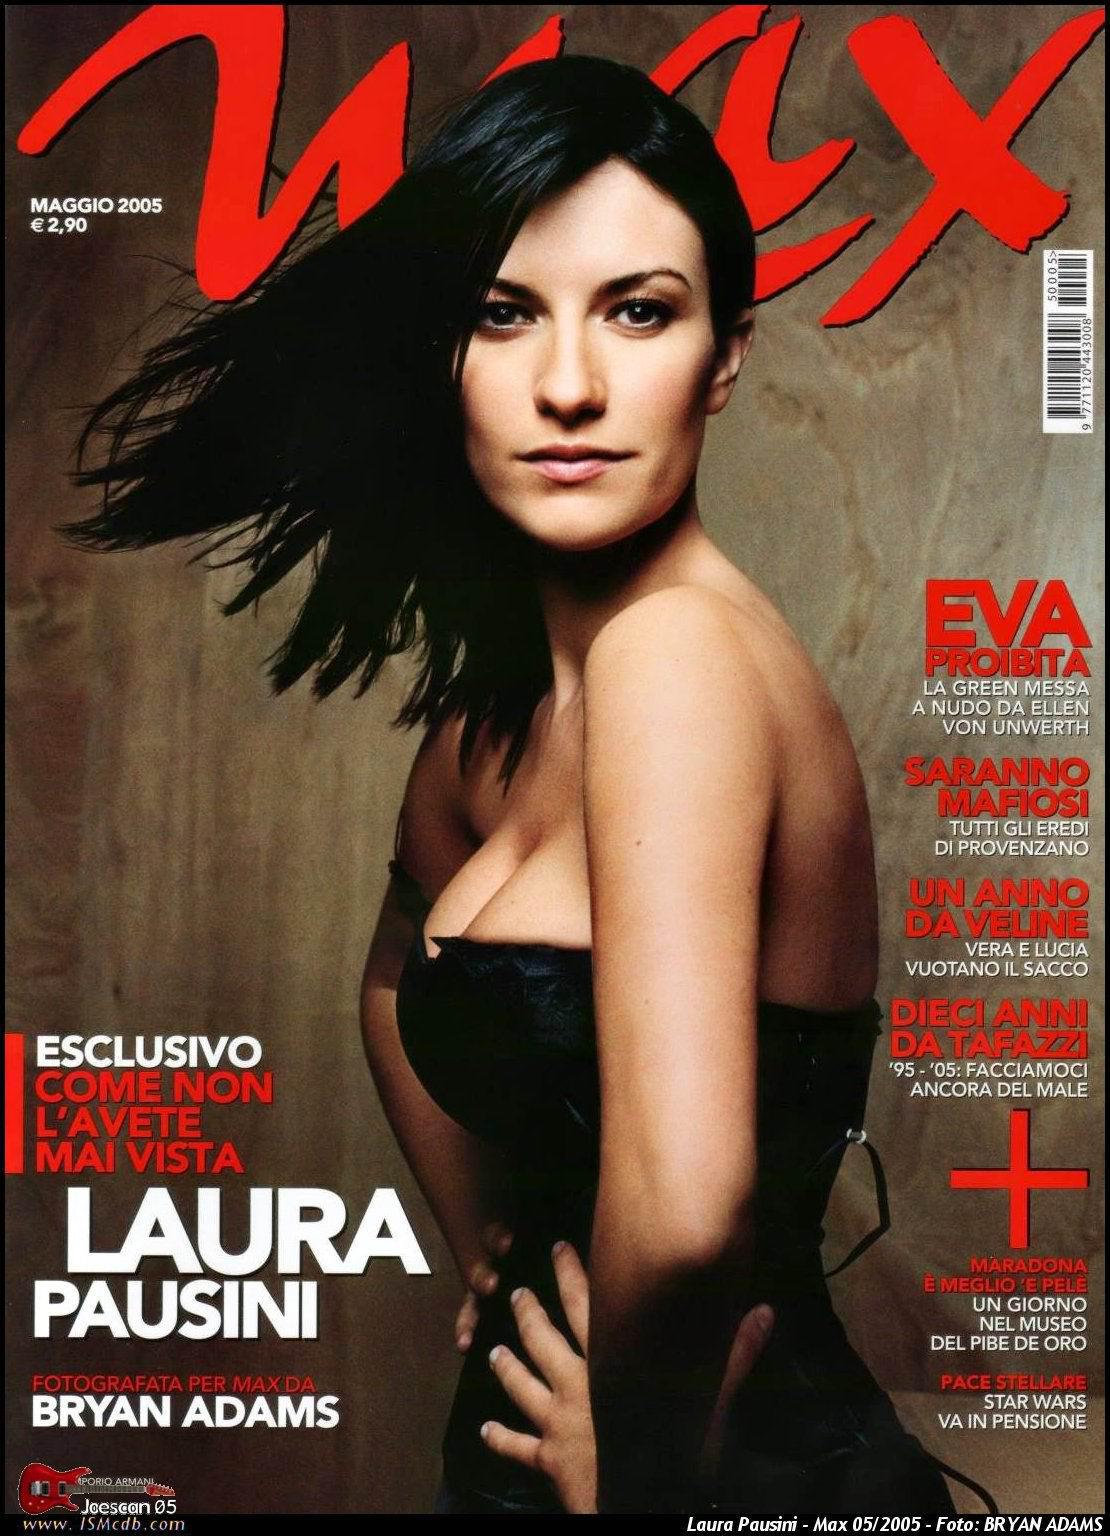 Get your heart racing with laura pausini naked